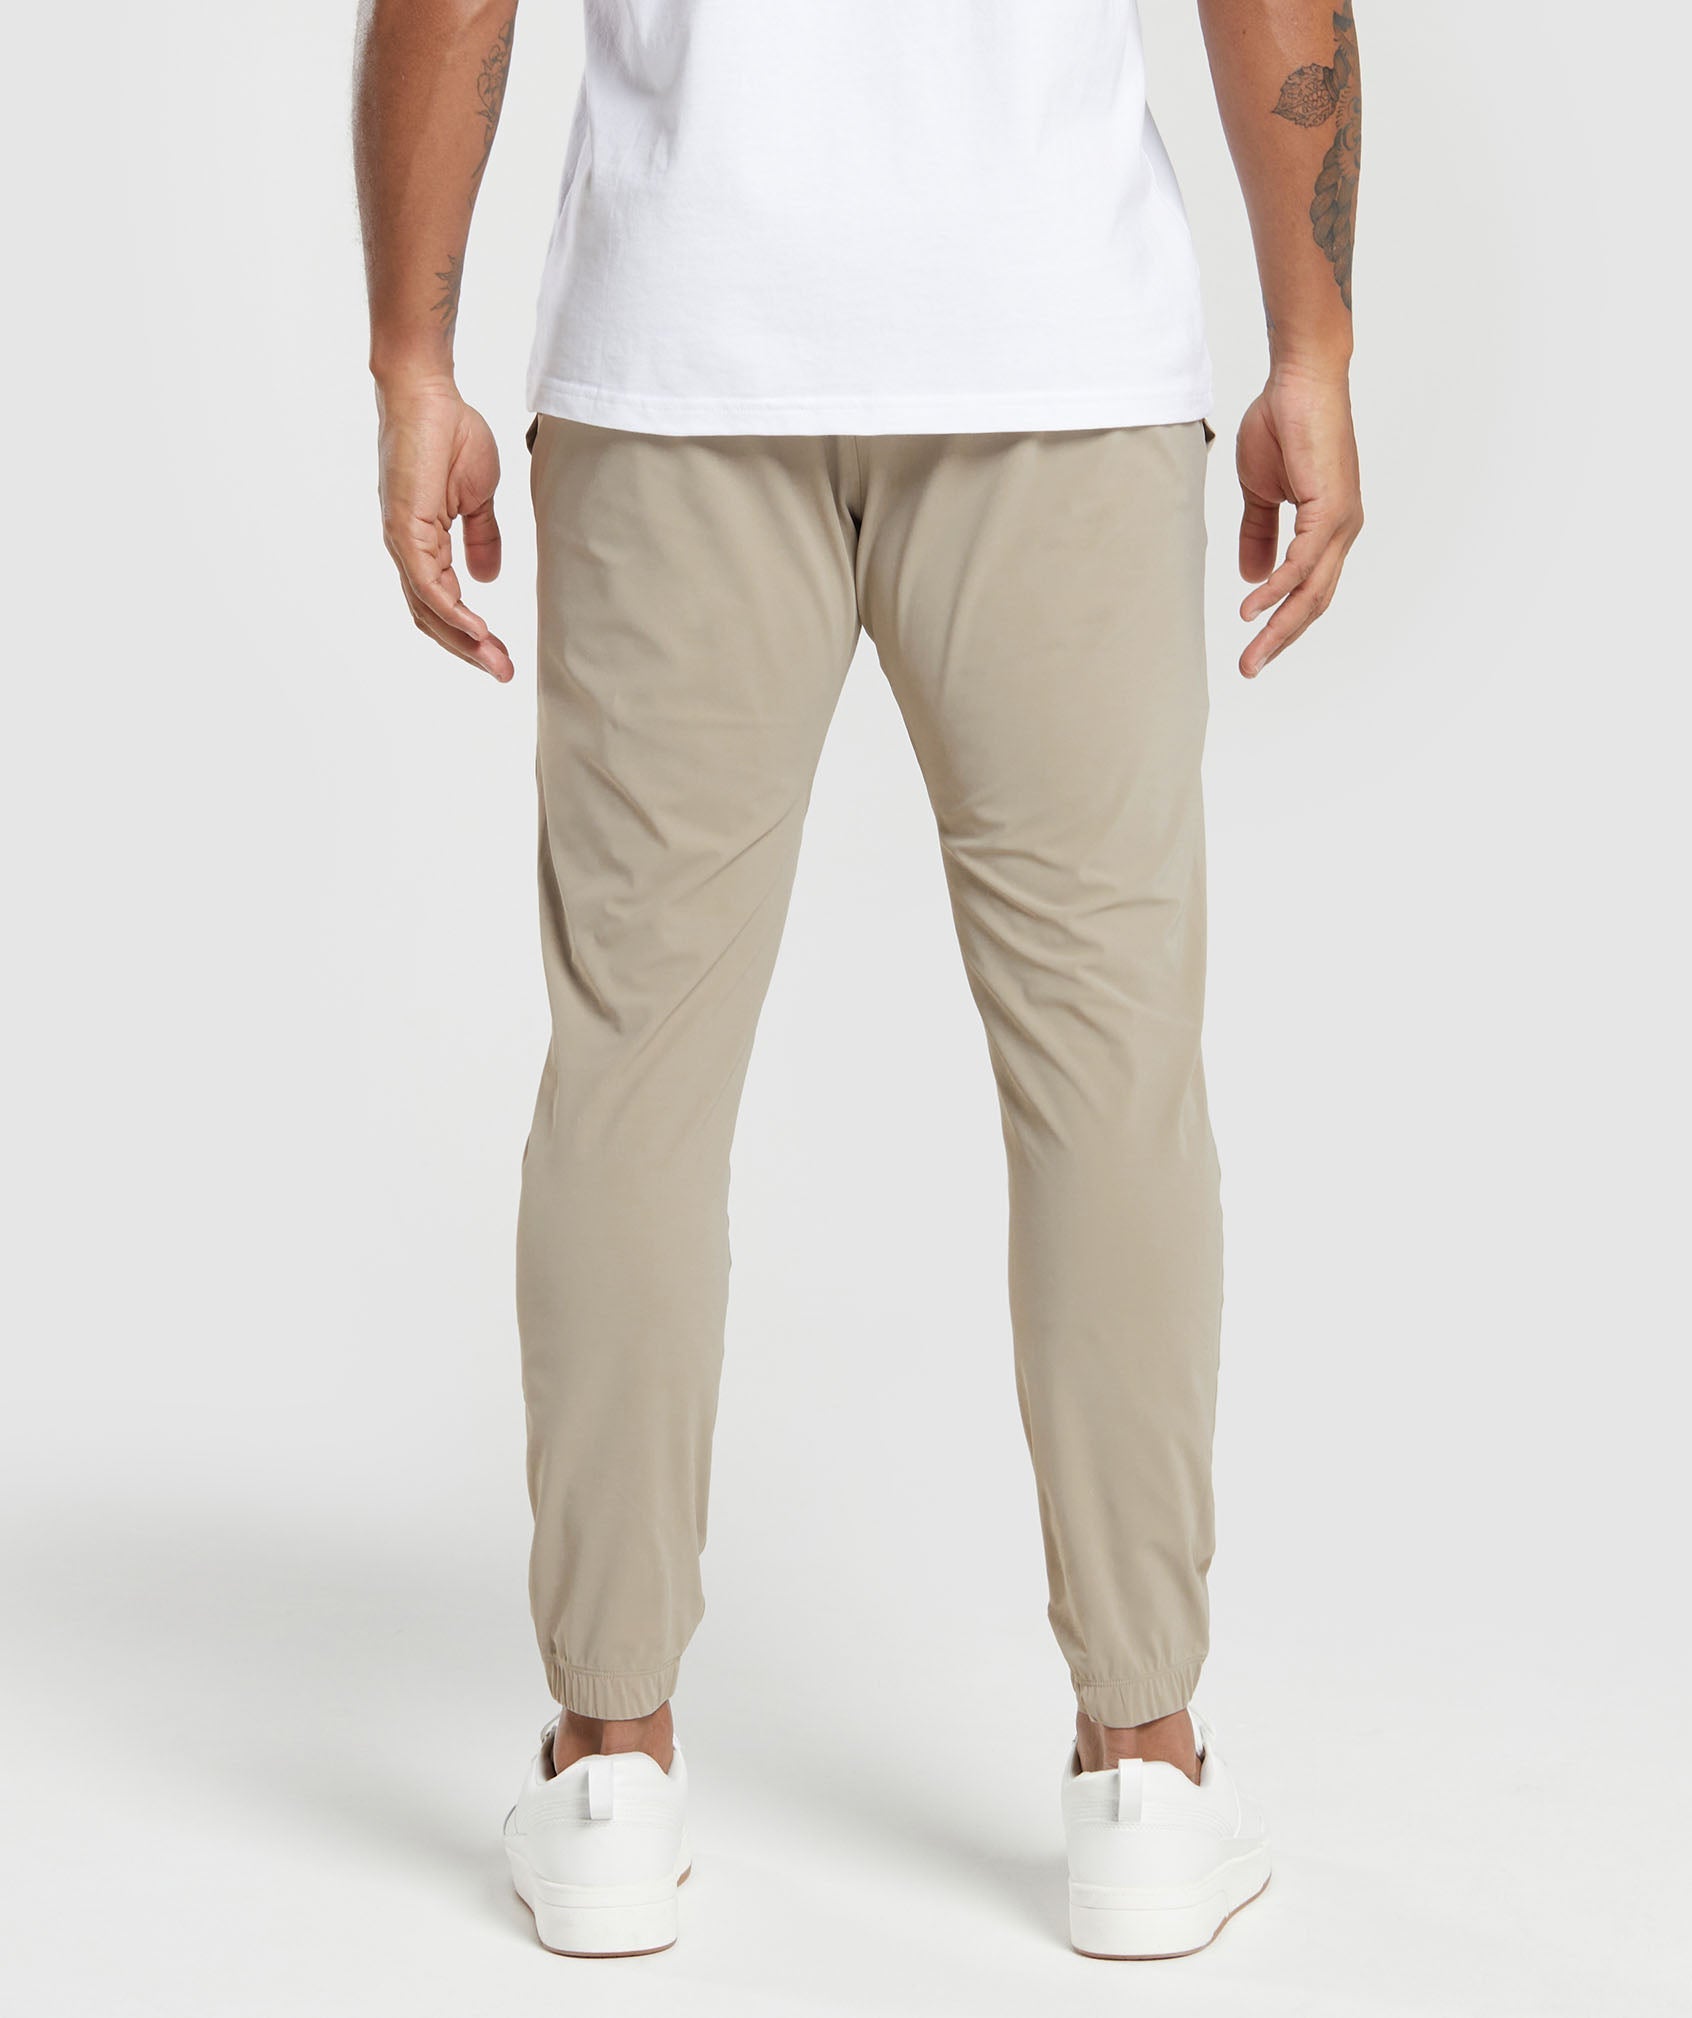 Studio Joggers in Sand Brown - view 2